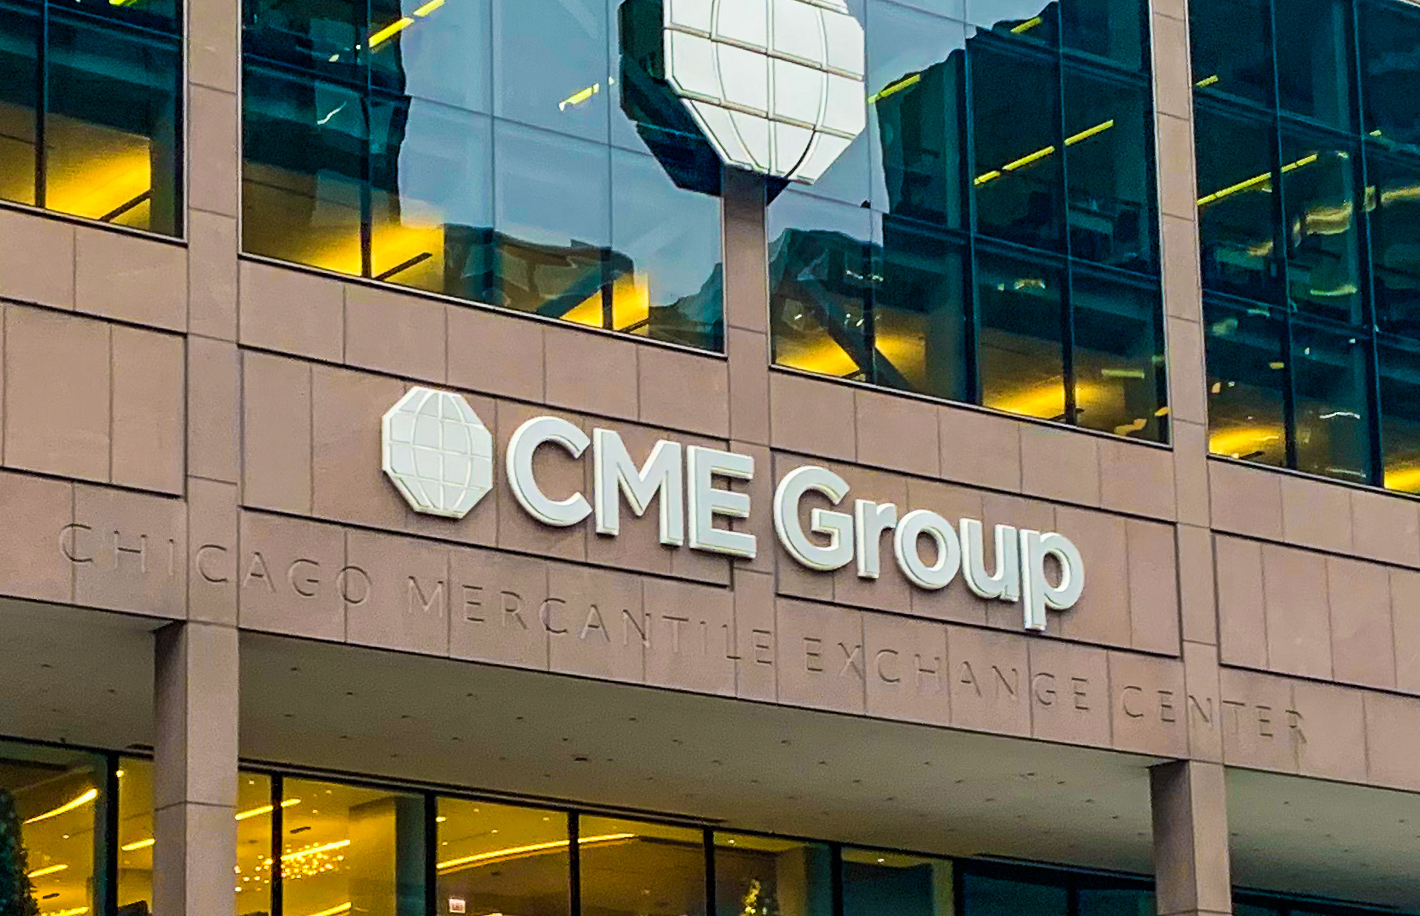 Cme-rises-in-bitcoin-futures-rankings-as-institutional-interest-grows